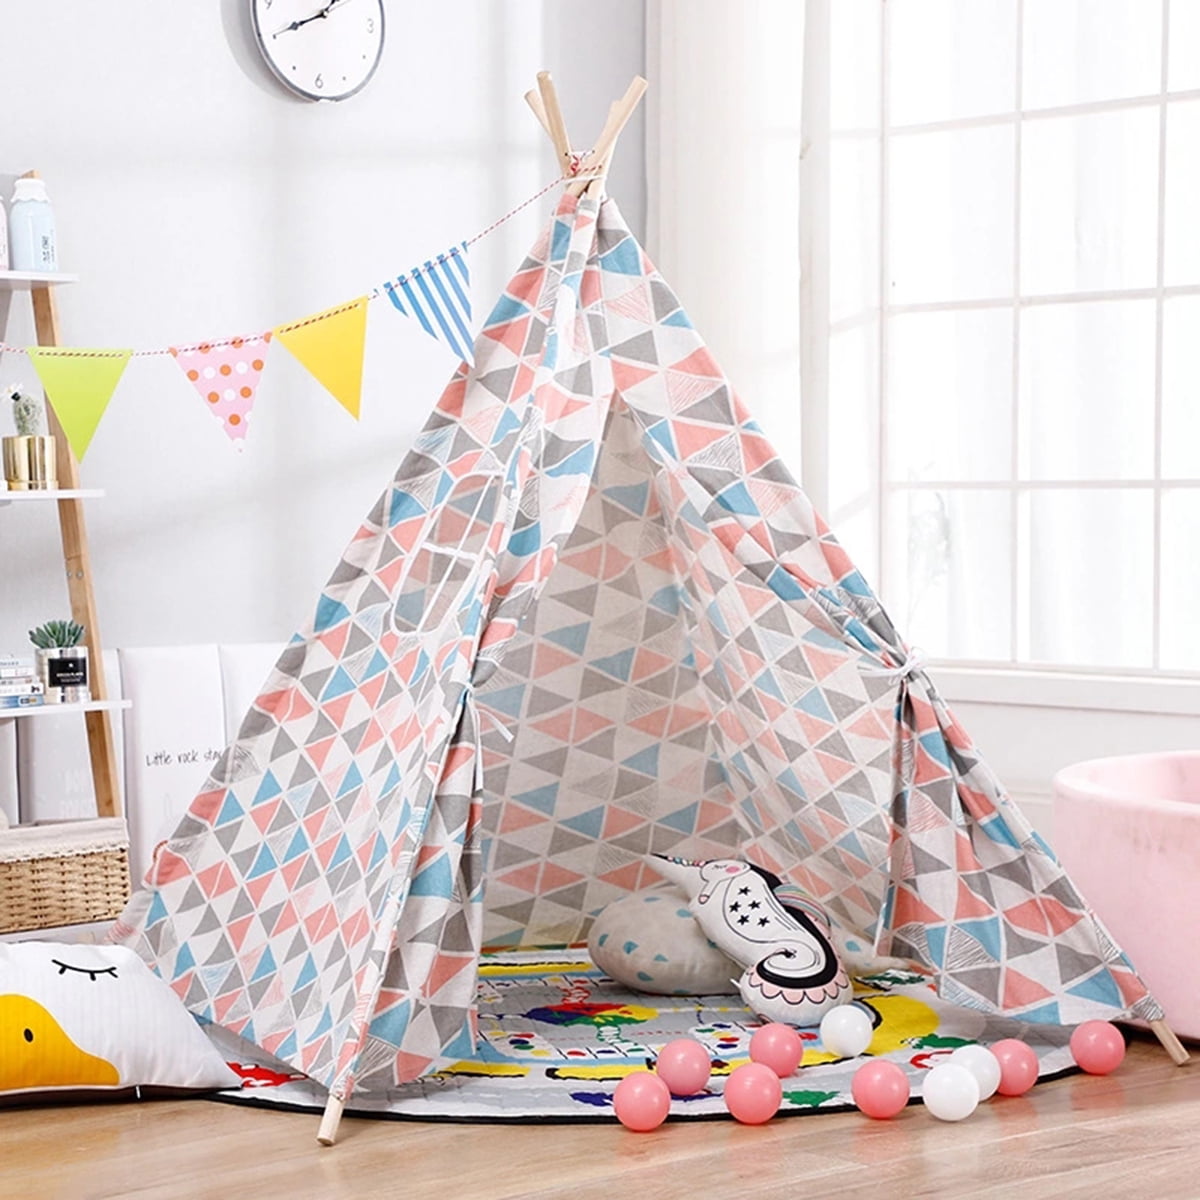 Best Kids Toddles Pop Up Tent Teepee Play House Birthday Gift Outdoor Toys 